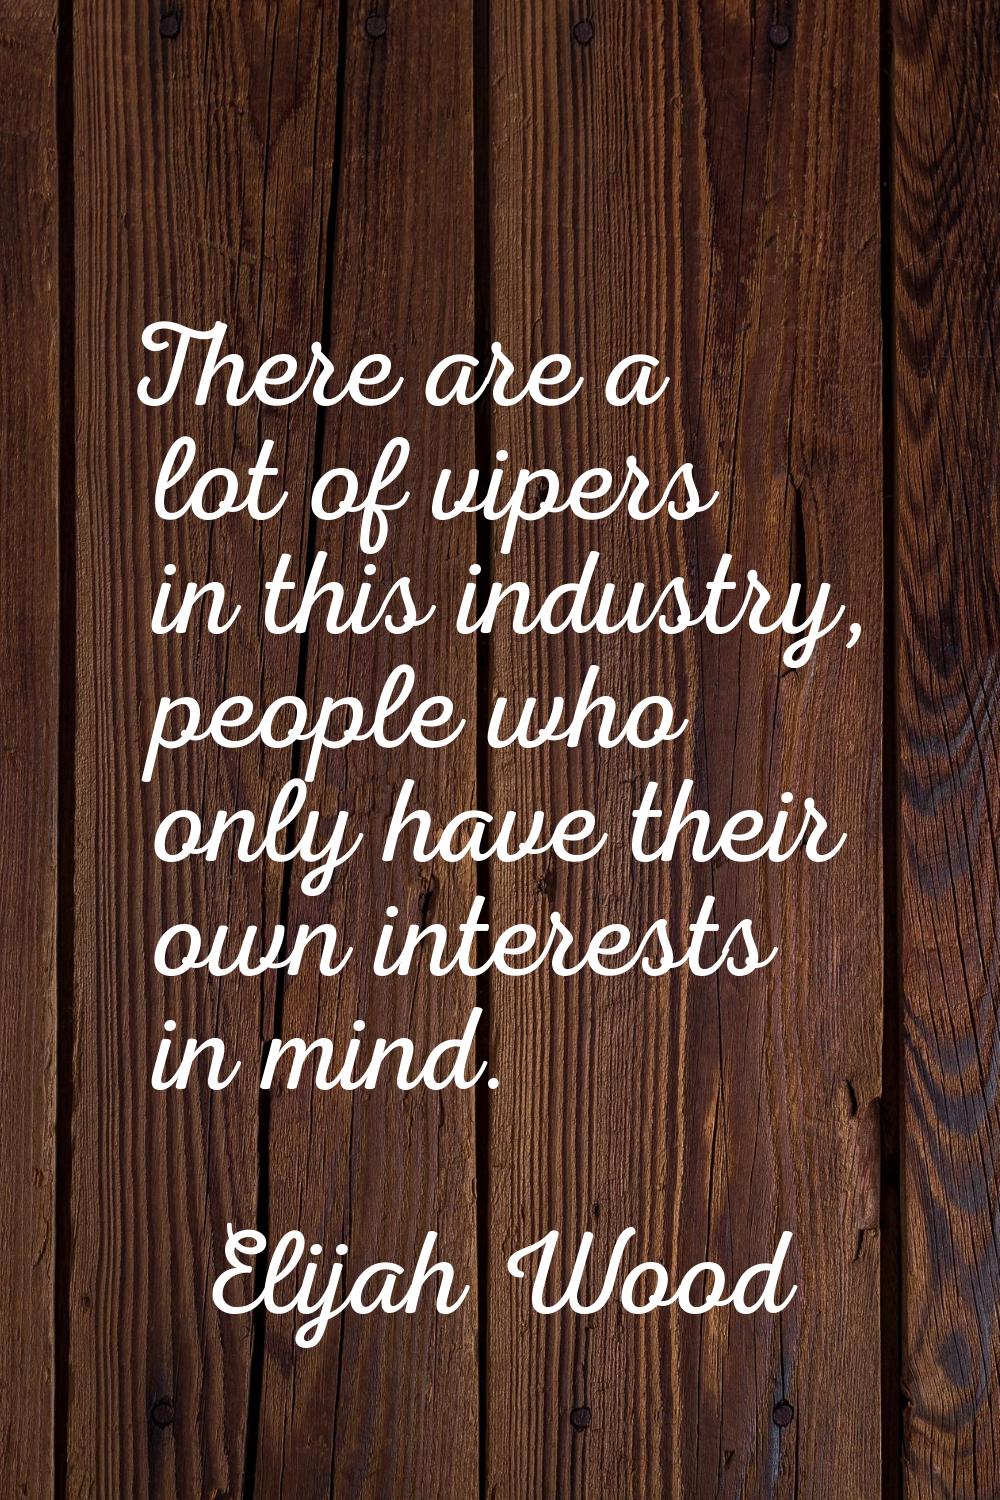 There are a lot of vipers in this industry, people who only have their own interests in mind.